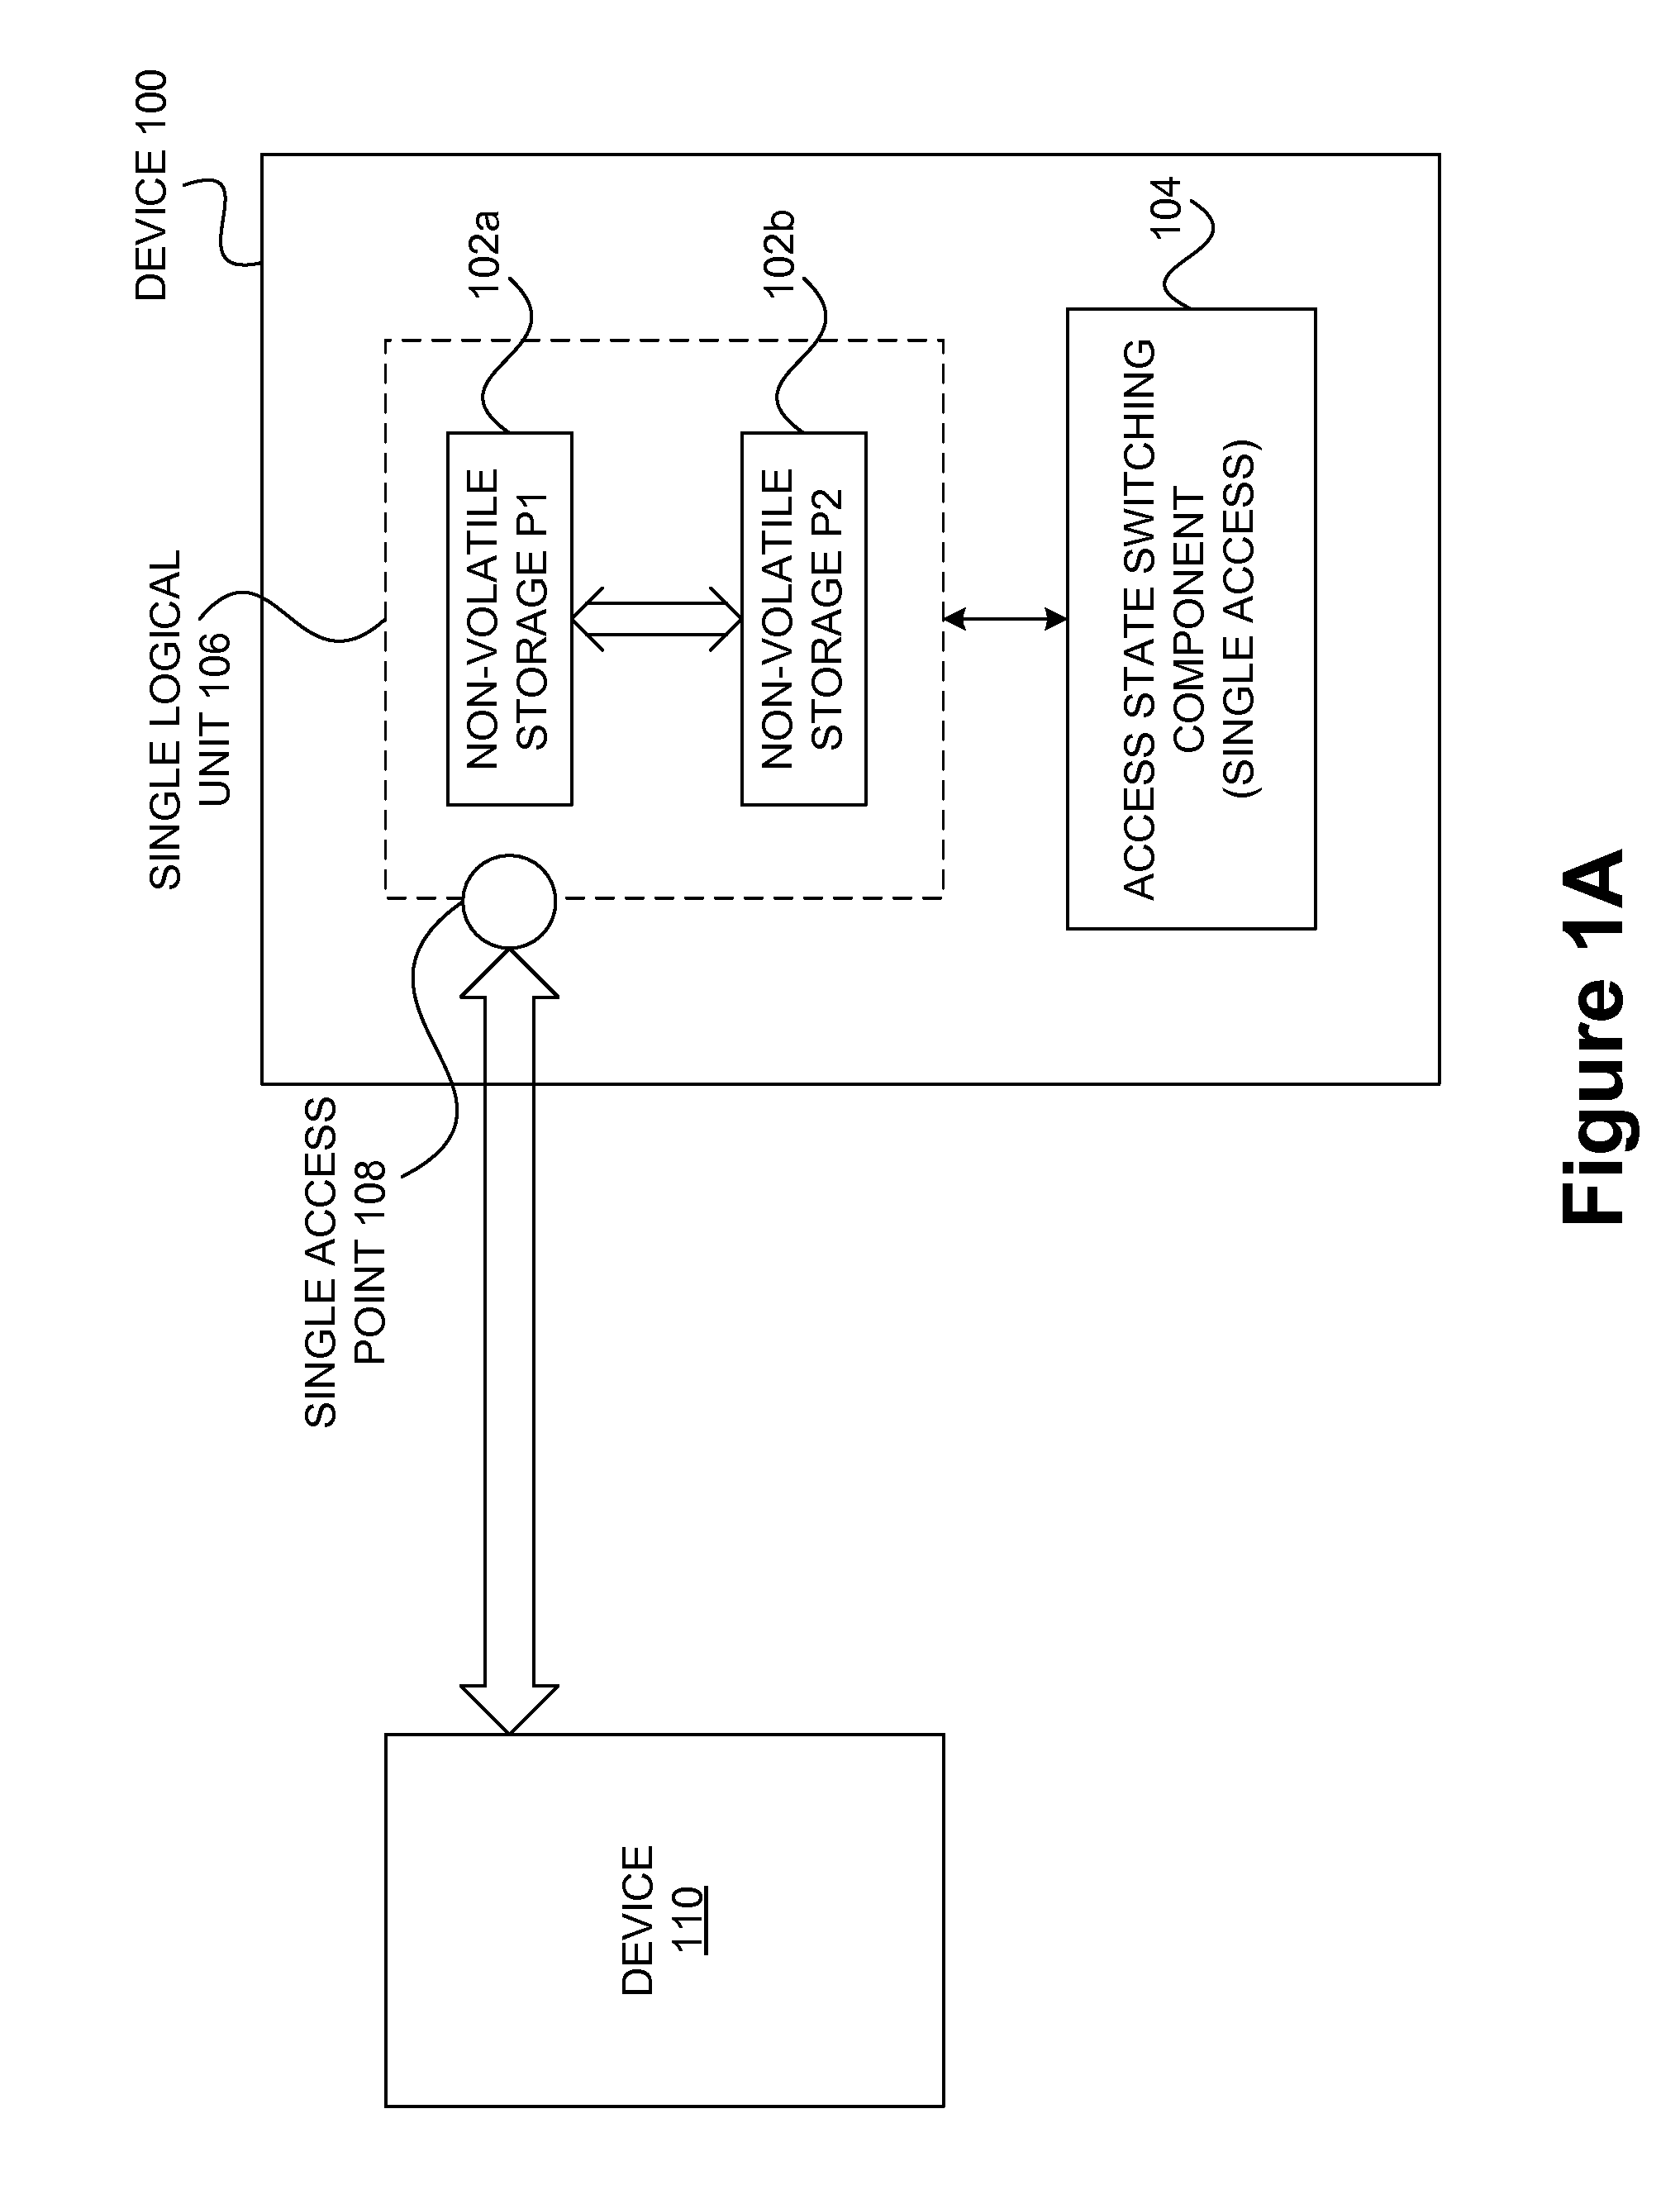 Switchable access states for non-volatile storage devices